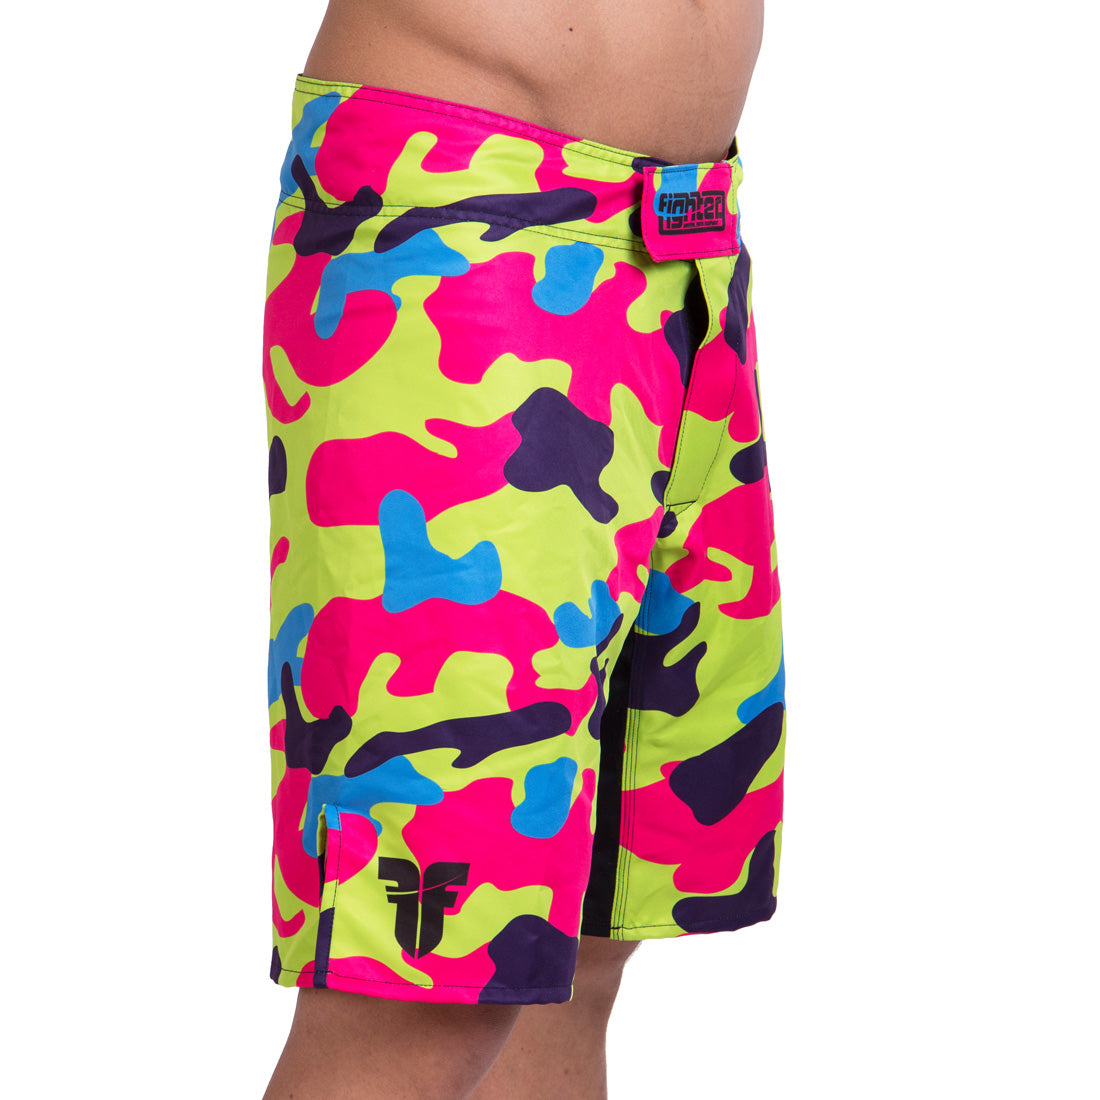 Fighter MMA Shorts - Camouflage-Farbmix, FSHM-07